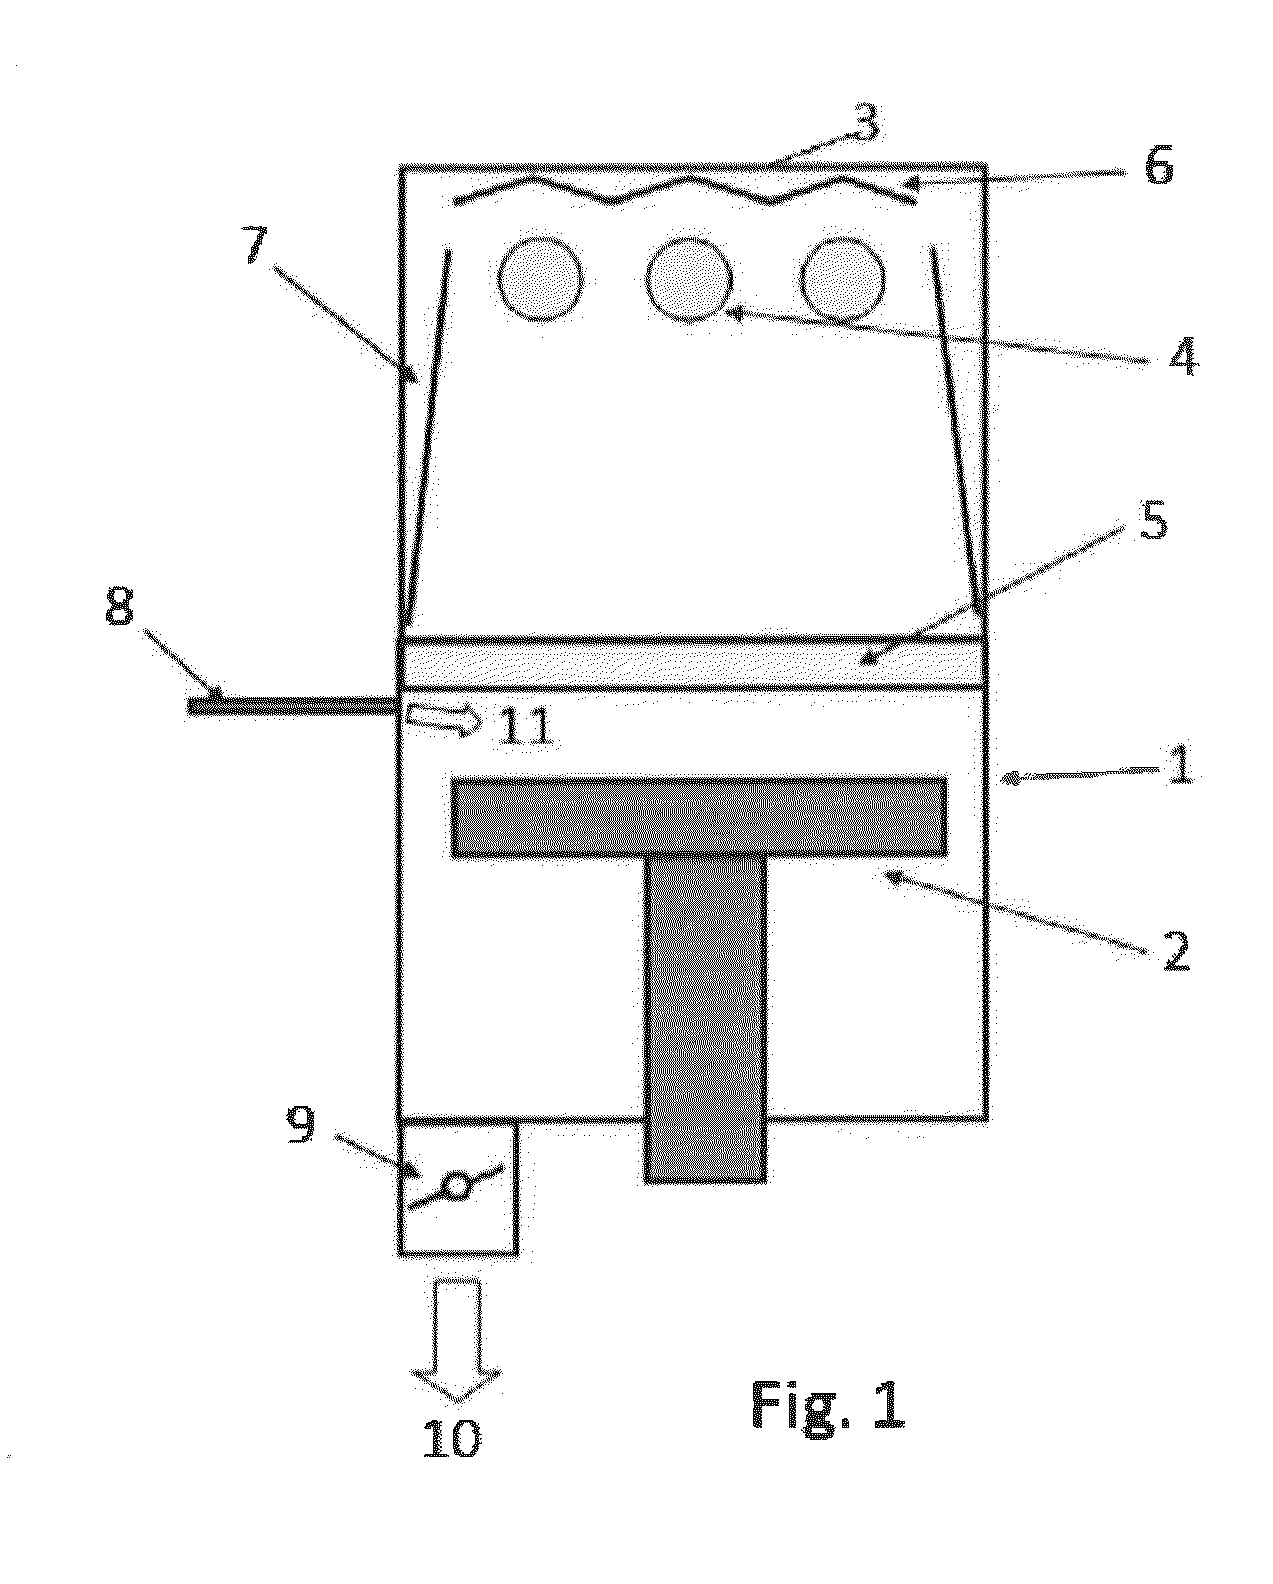 Method for repairing damage of dielectric film by hydrocarbon restoration and hydrocarbon depletion using UV irradiation